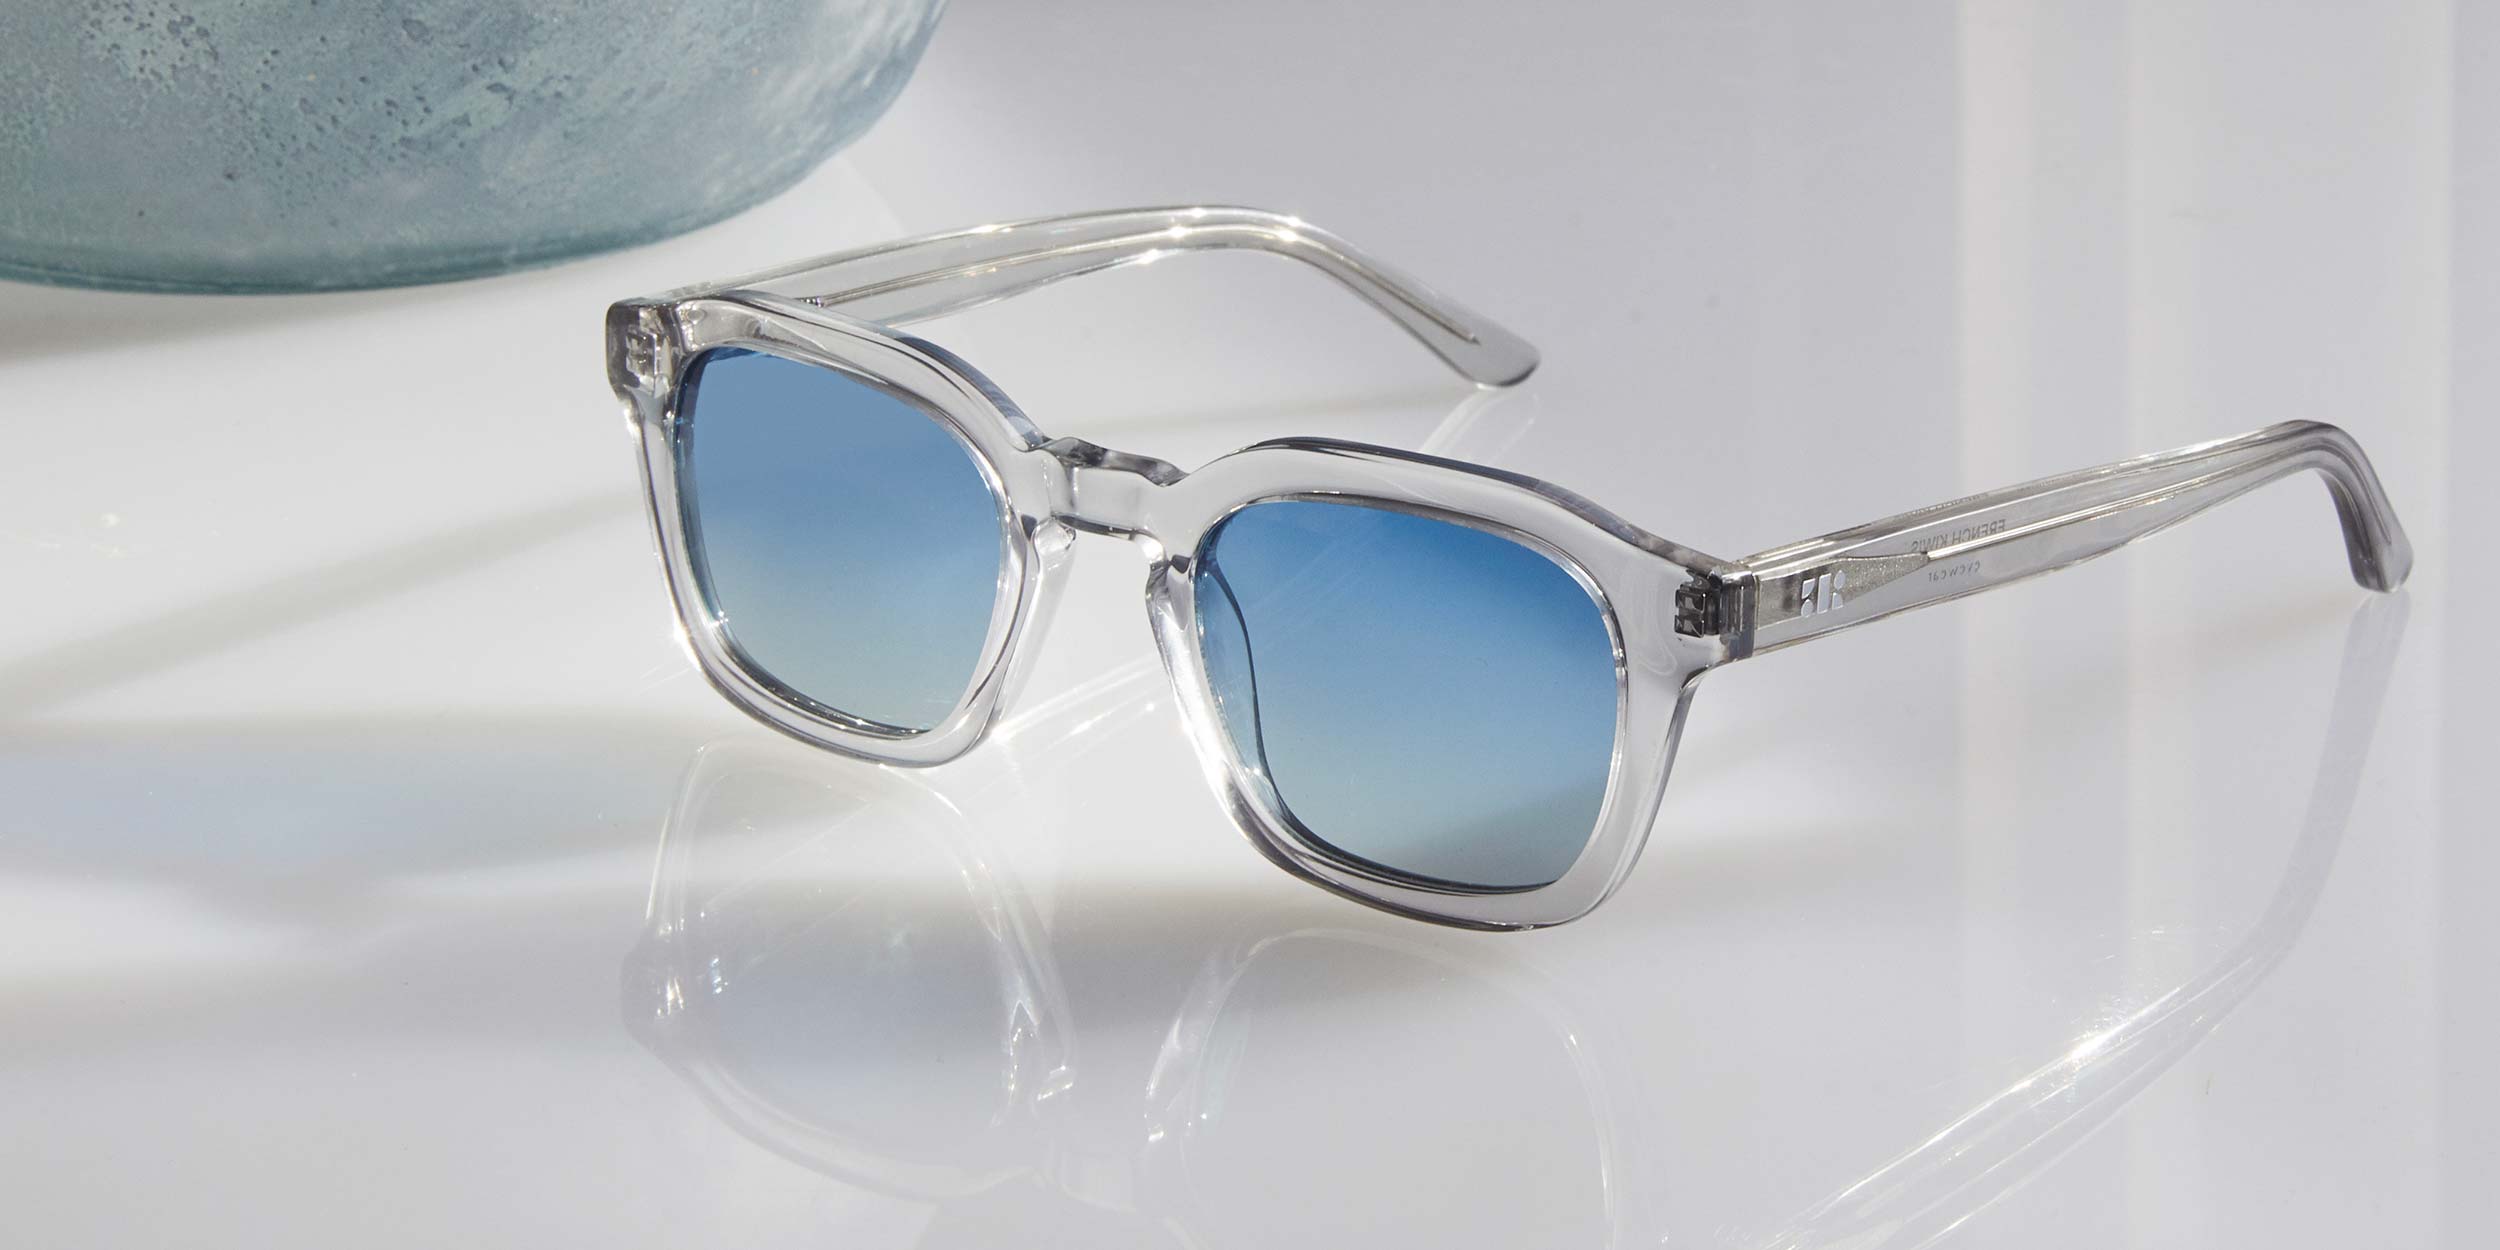 Photo Details of Oscar Sun Clear Grey Sun Glasses in a room